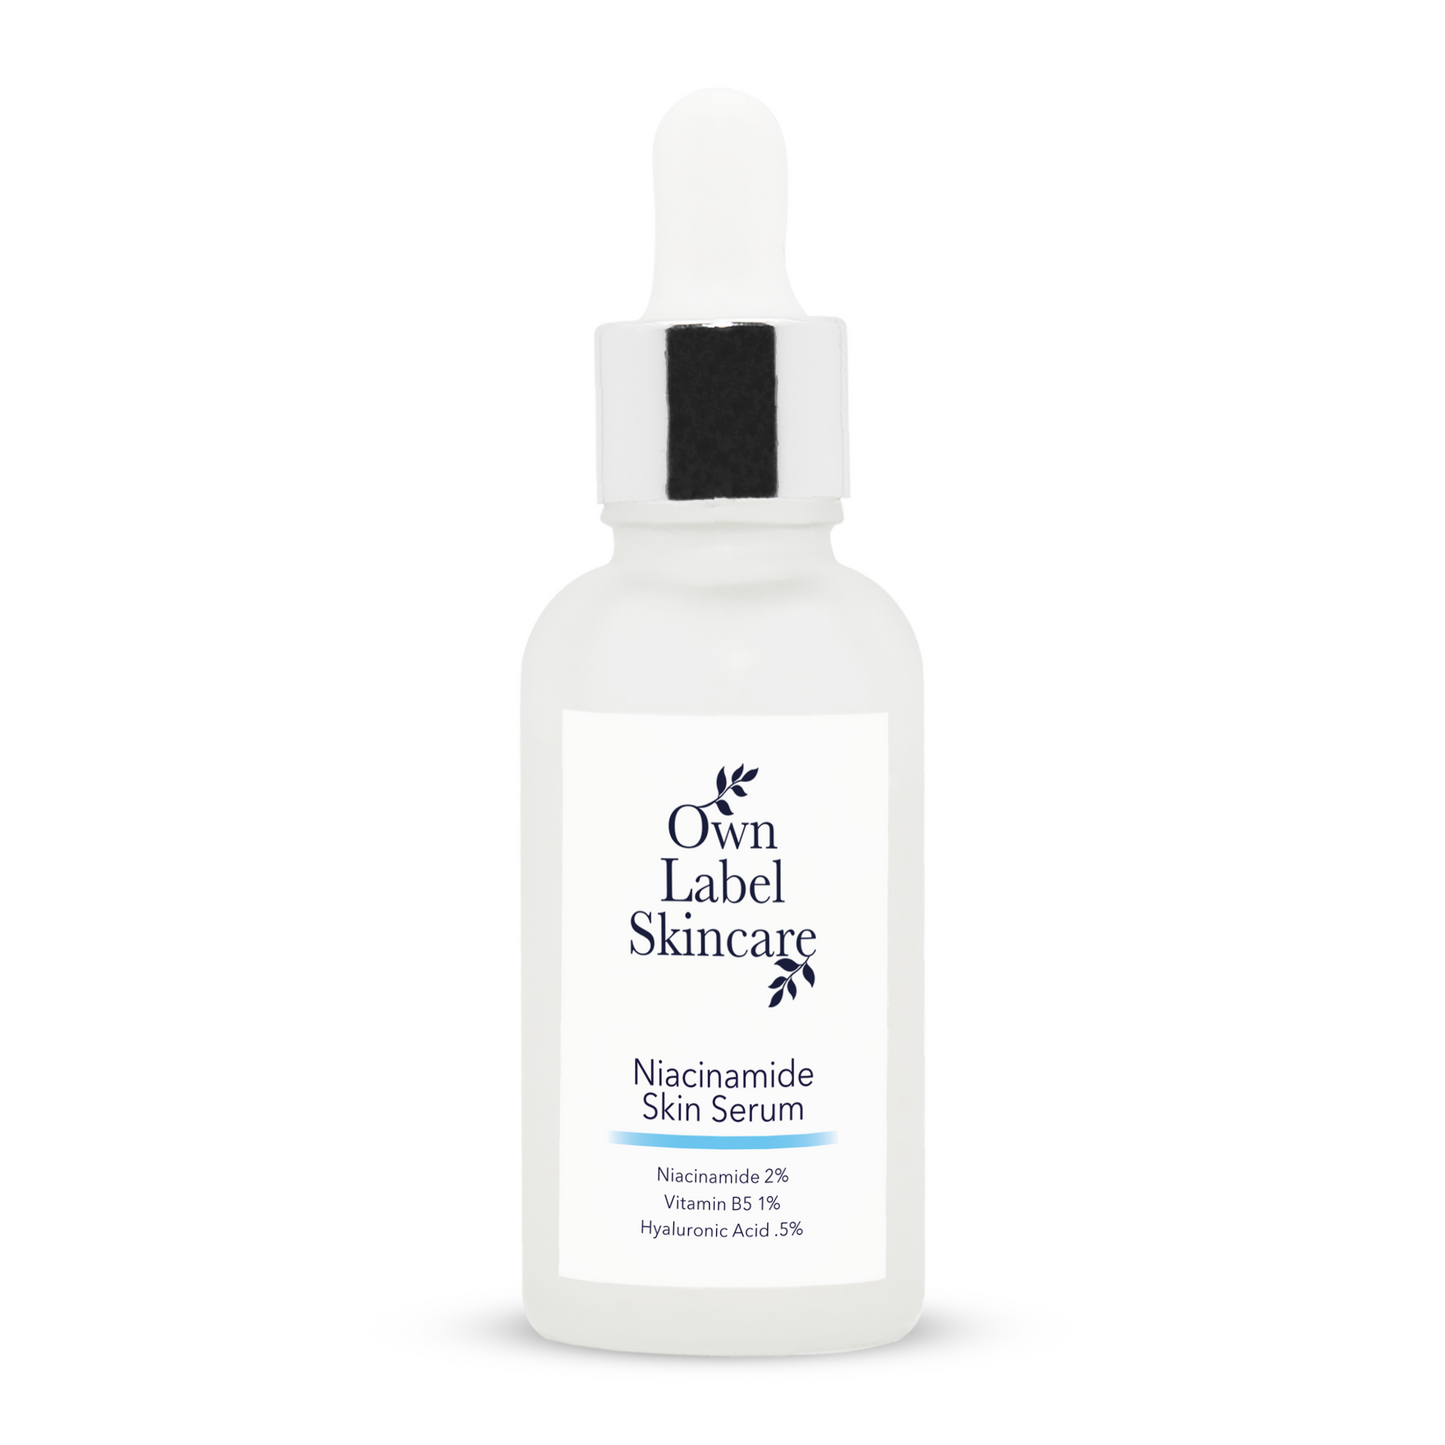 Niacinamide serum bottle on a white back ground, this formula will reduce inflammation, balance oil production on the skin, and even out the skin tone. Leaving a more radiant complexion.